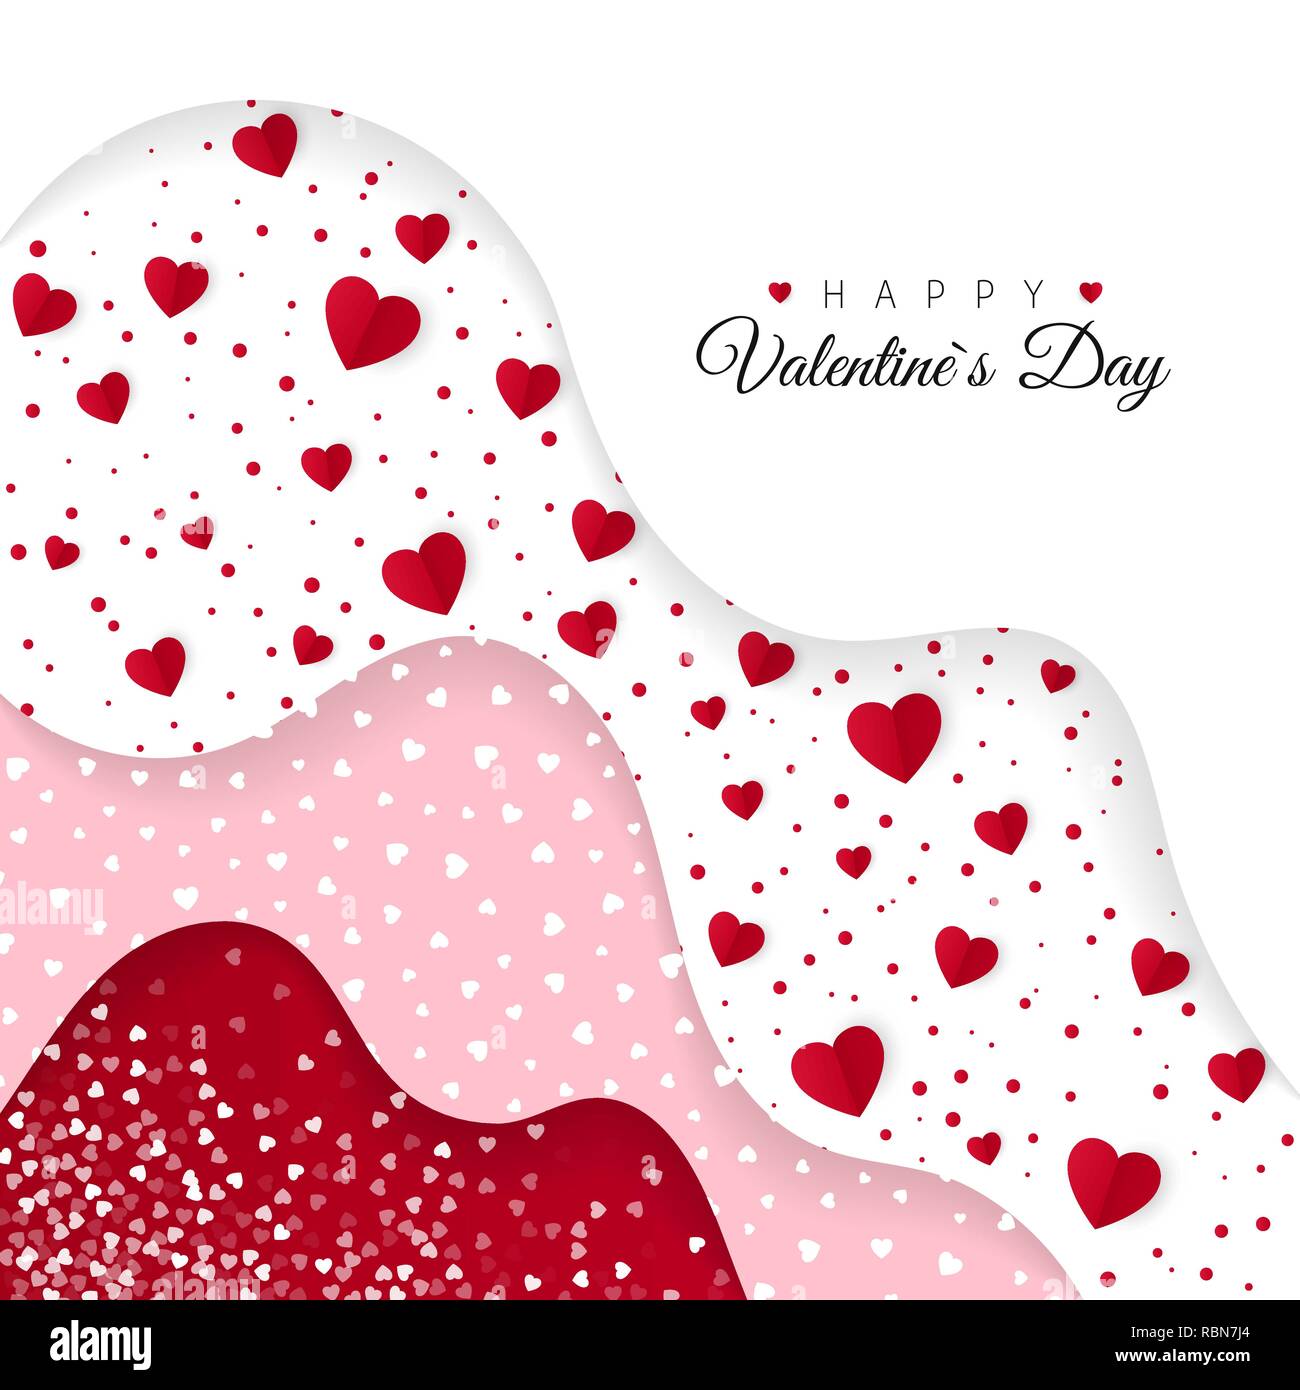 Happy Valentines Day greeting card. Red Layers with different Decorative Elements.  Romantic Weeding Design. Background with Ornaments and Hearts. Vec Stock Vector